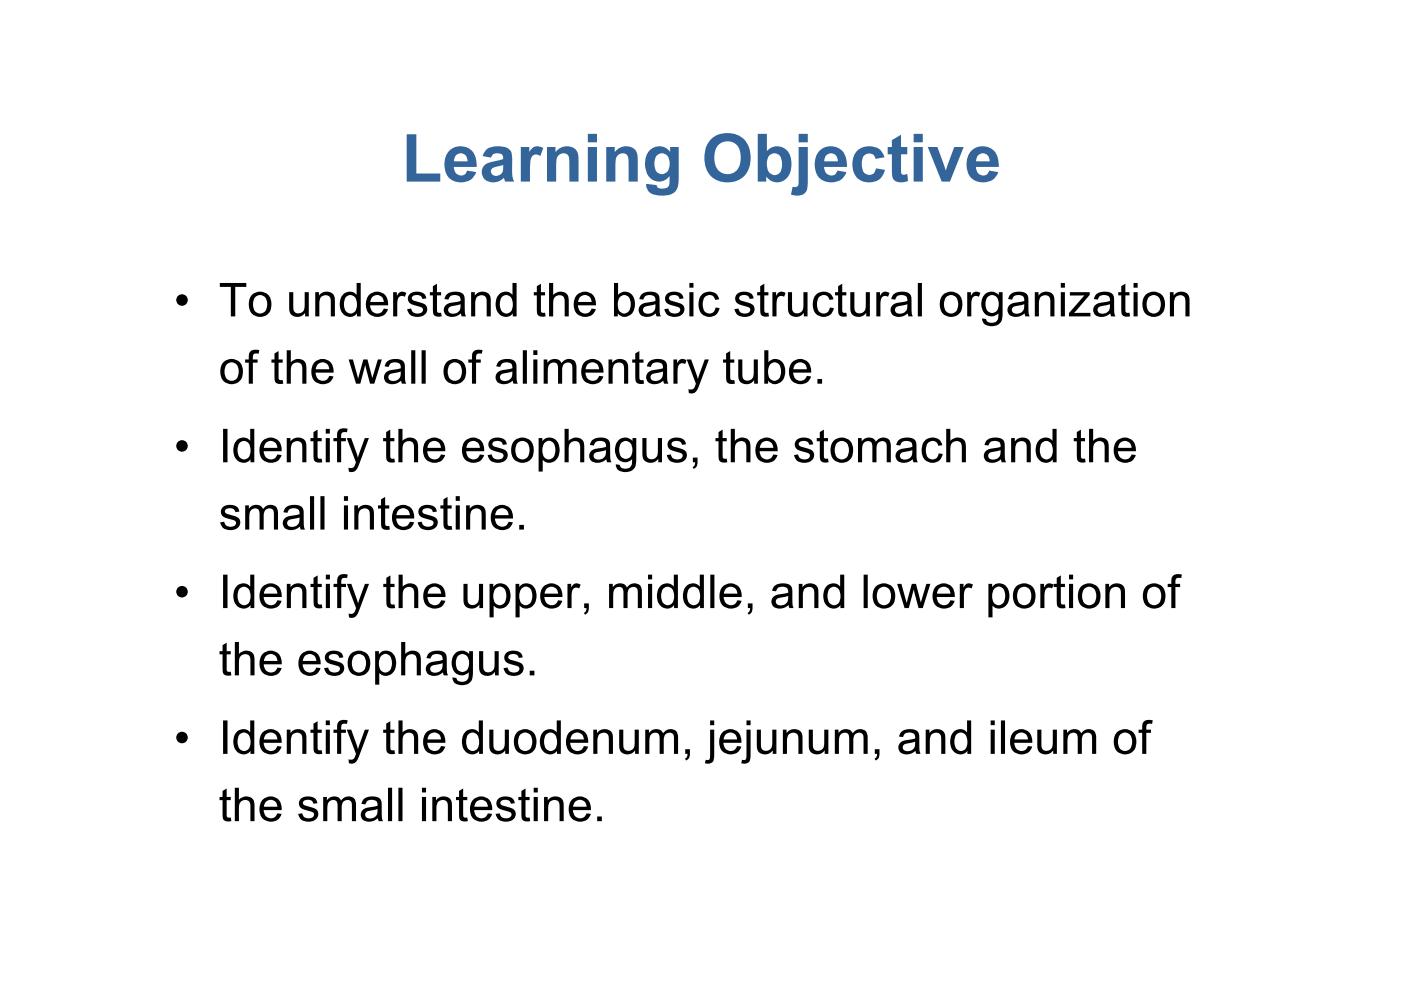 block10-1_04.jpg - Learning Objective¡E To understand the basic structural organization  of the wall of alimentary tube.¡E Identify the esophagus, the stomach and the  small intestine.¡E Identify the upper, middle, and lower portion of  the esophagus.¡E Identify the duodenum, jejunum, and ileum of  the small intestine.